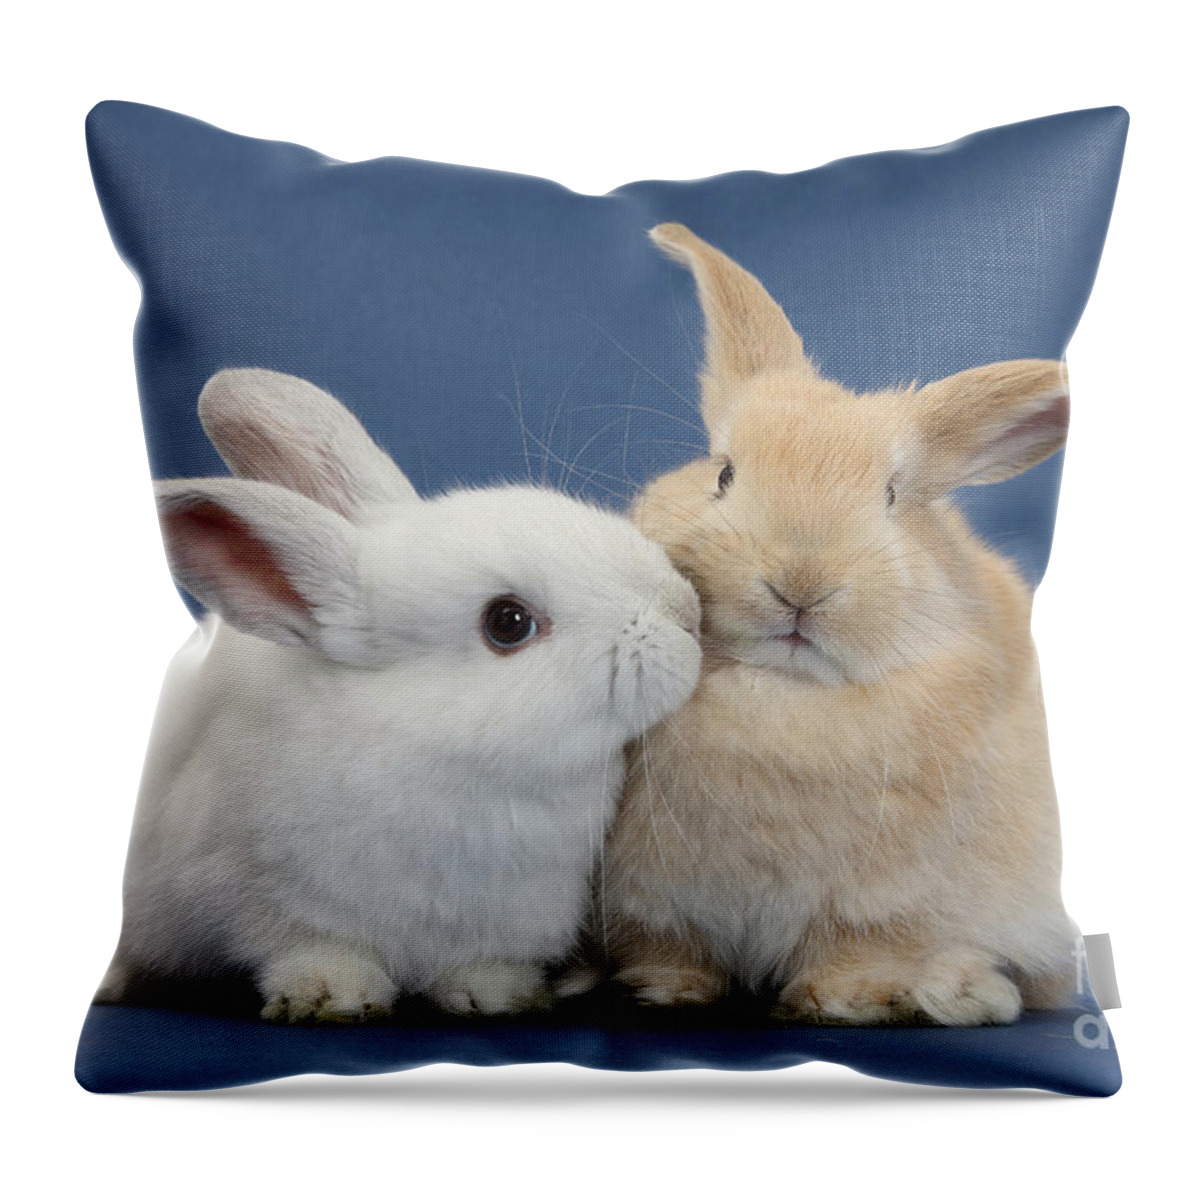 Nature Throw Pillow featuring the photograph White Rabbit And Sandy Rabbit by Mark Taylor